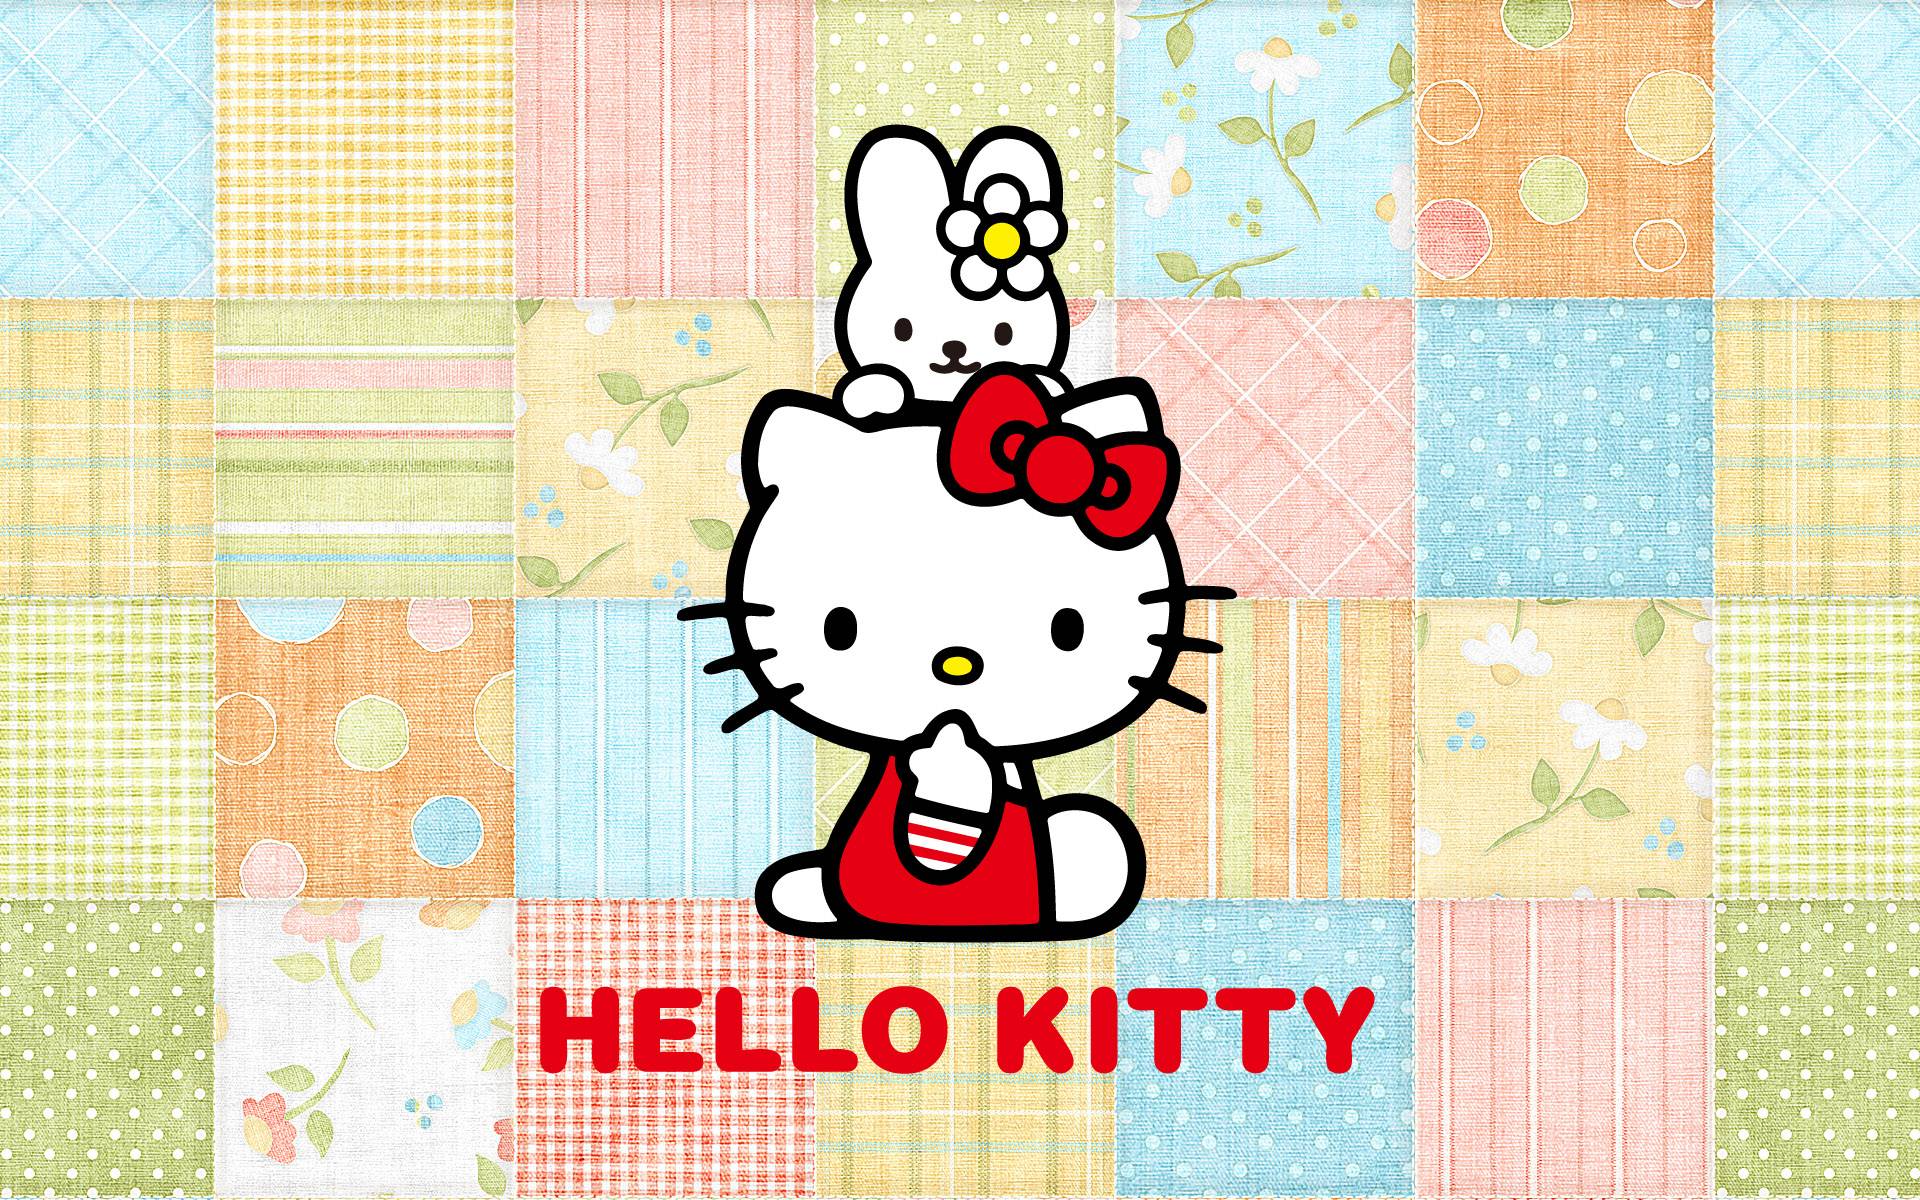 Hello Kitty Pc Wallpapers Top Free Hello Kitty Pc Backgrounds Wallpaperaccess Kitty white itulah nama lengkapnya. hello kitty pc wallpapers top free